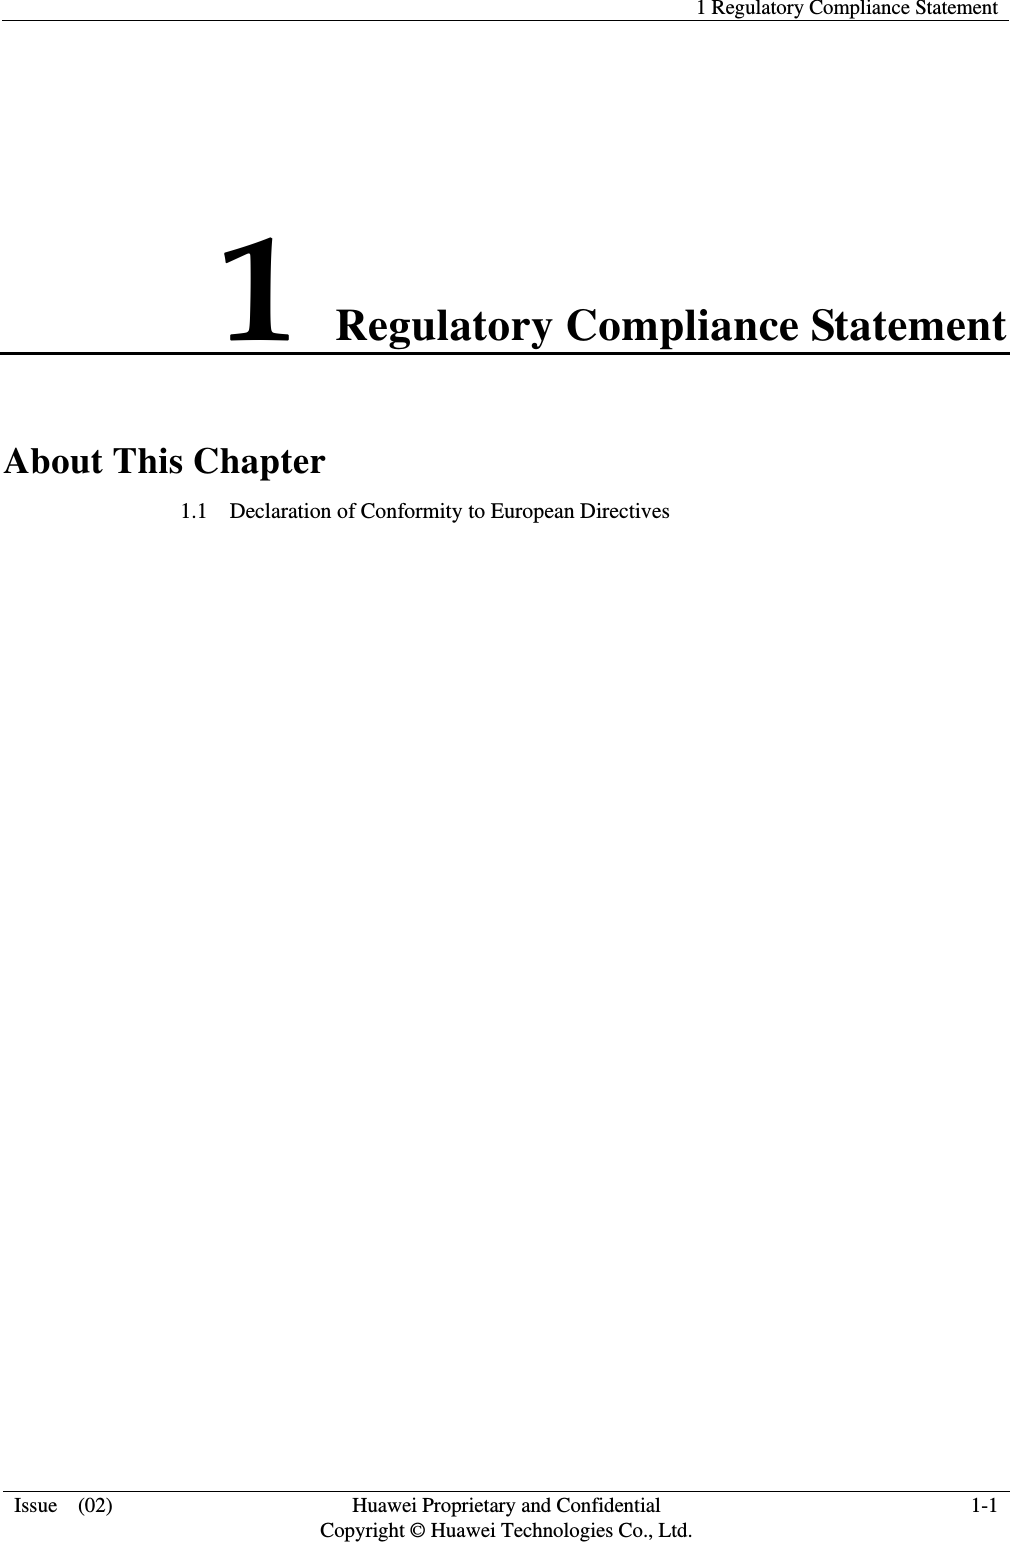   1 Regulatory Compliance Statement  Issue  (02)  Huawei Proprietary and Confidential     Copyright © Huawei Technologies Co., Ltd. 1-1 1 Regulatory Compliance Statement About This Chapter 1.1    Declaration of Conformity to European Directives  